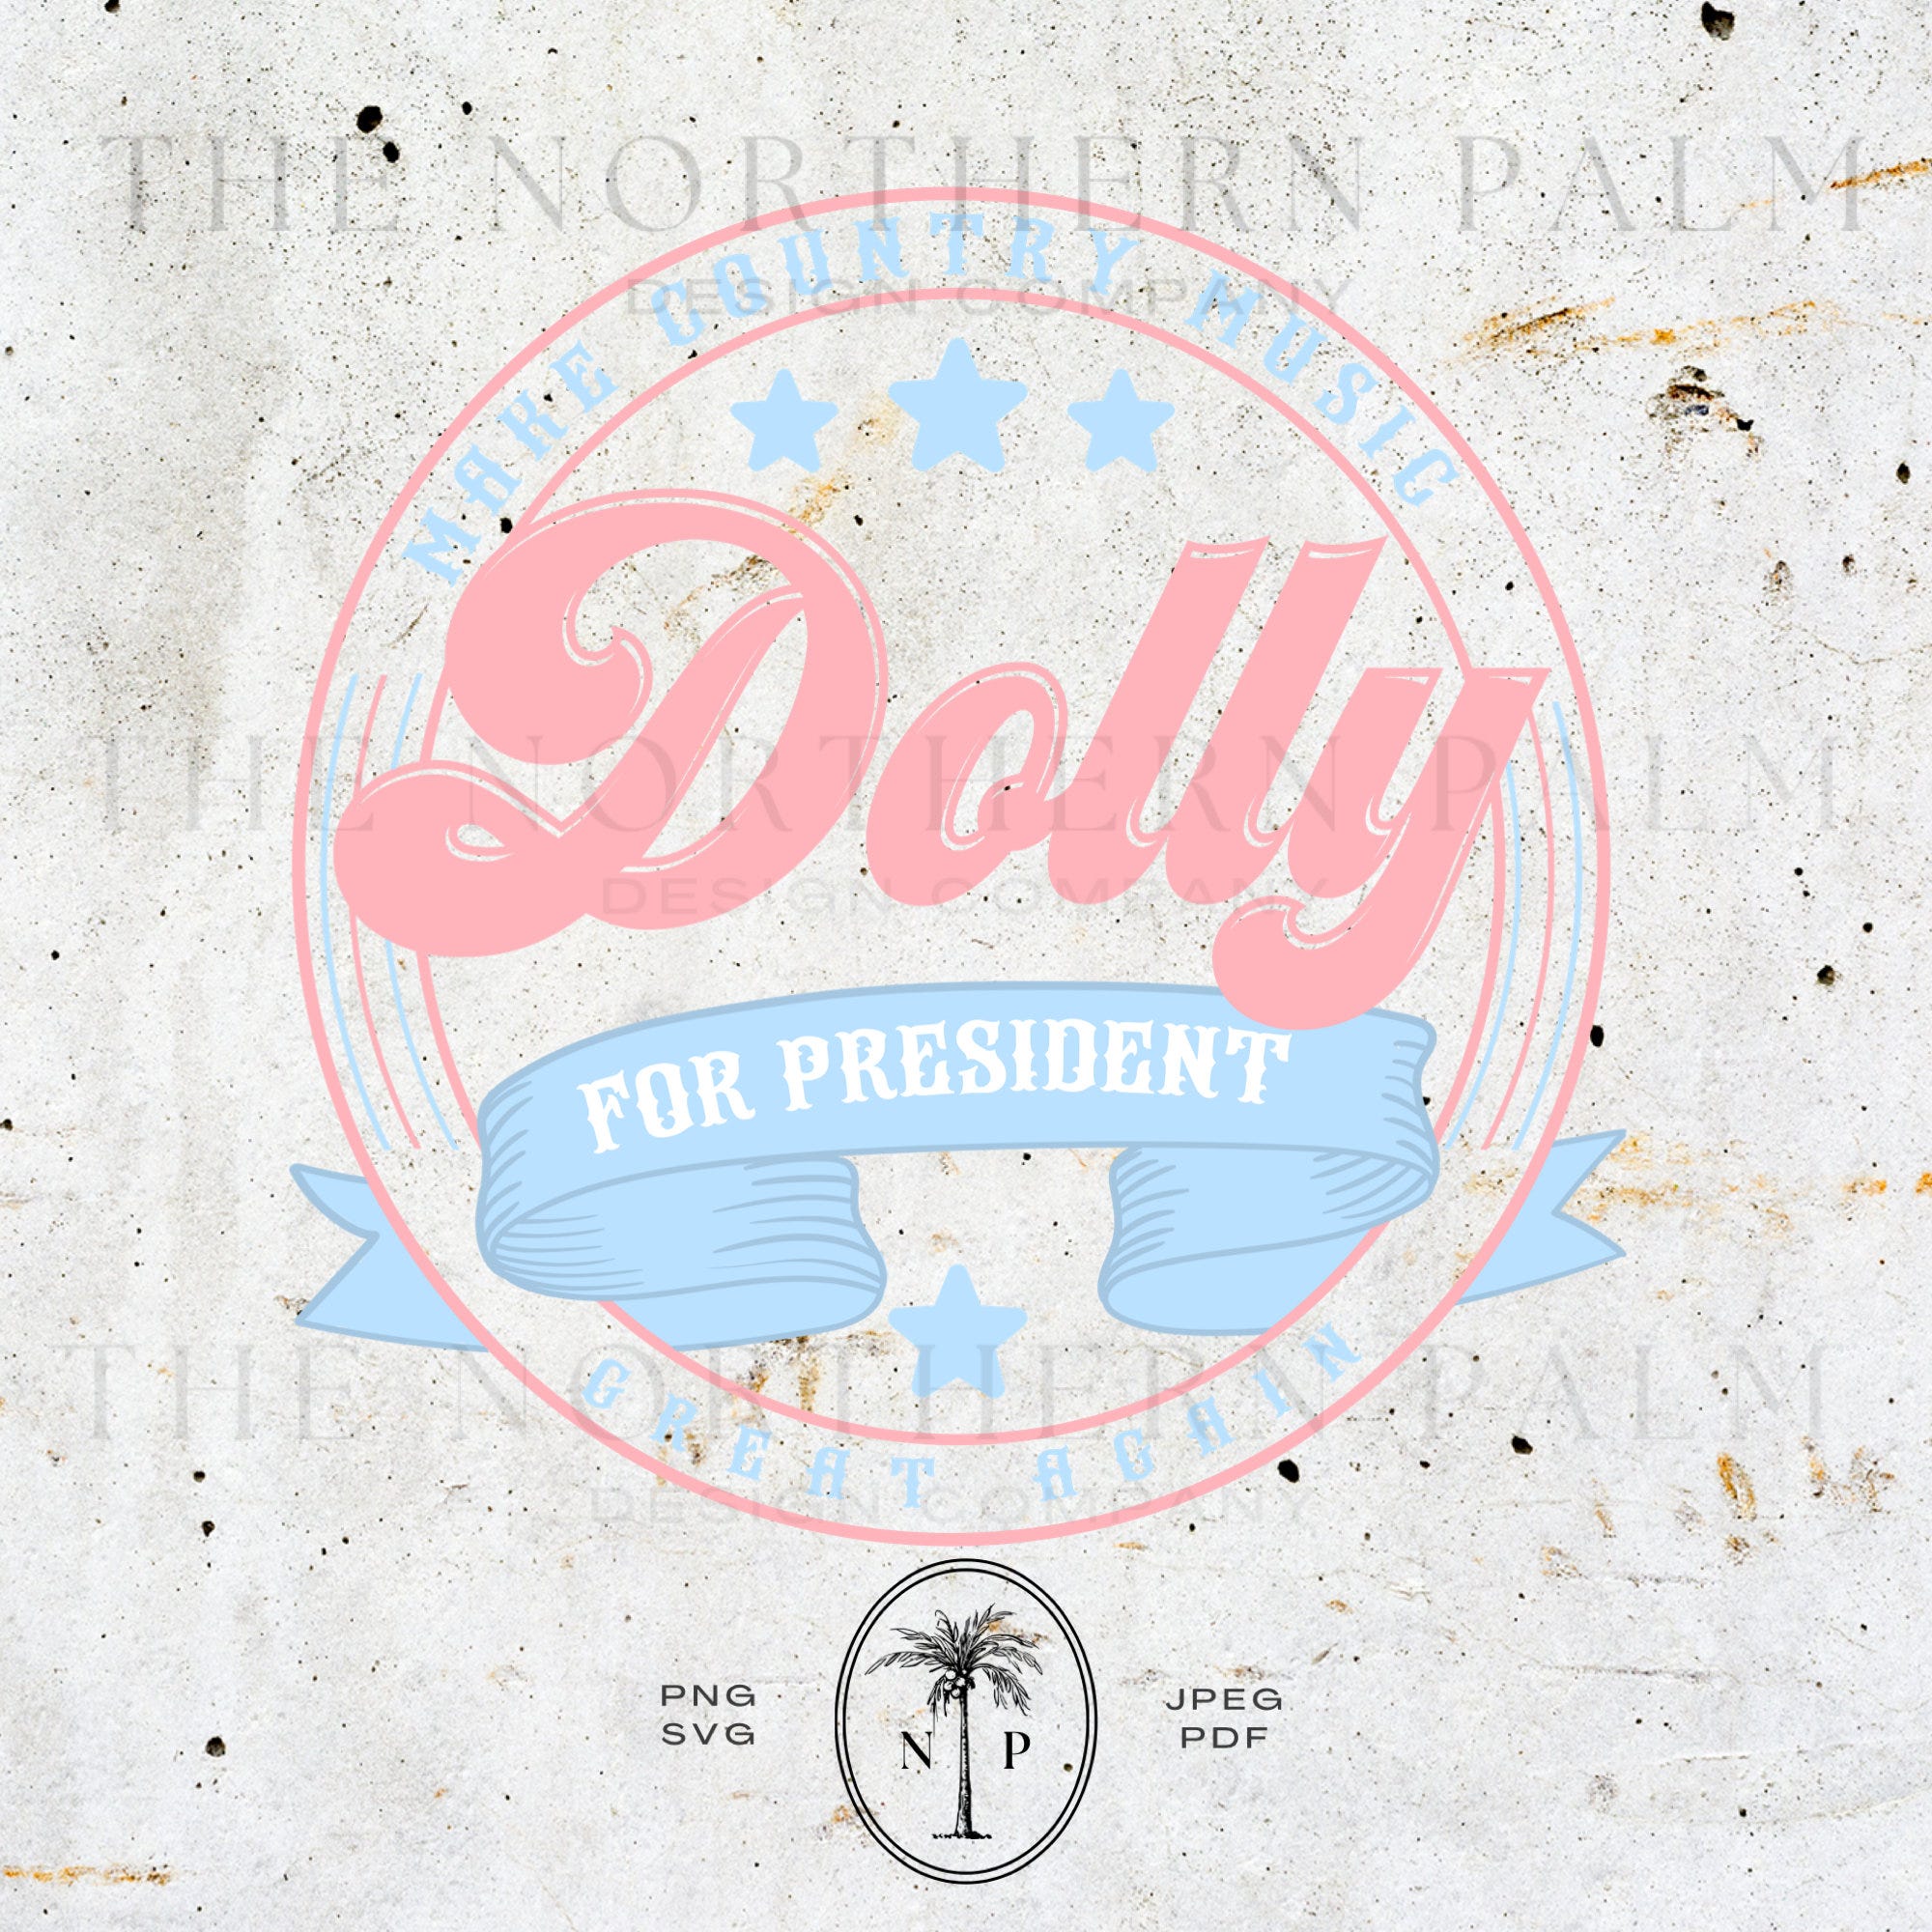 Dolly parton for president design svg png floral, what would dolly do, t shirt design country western cowgirl text